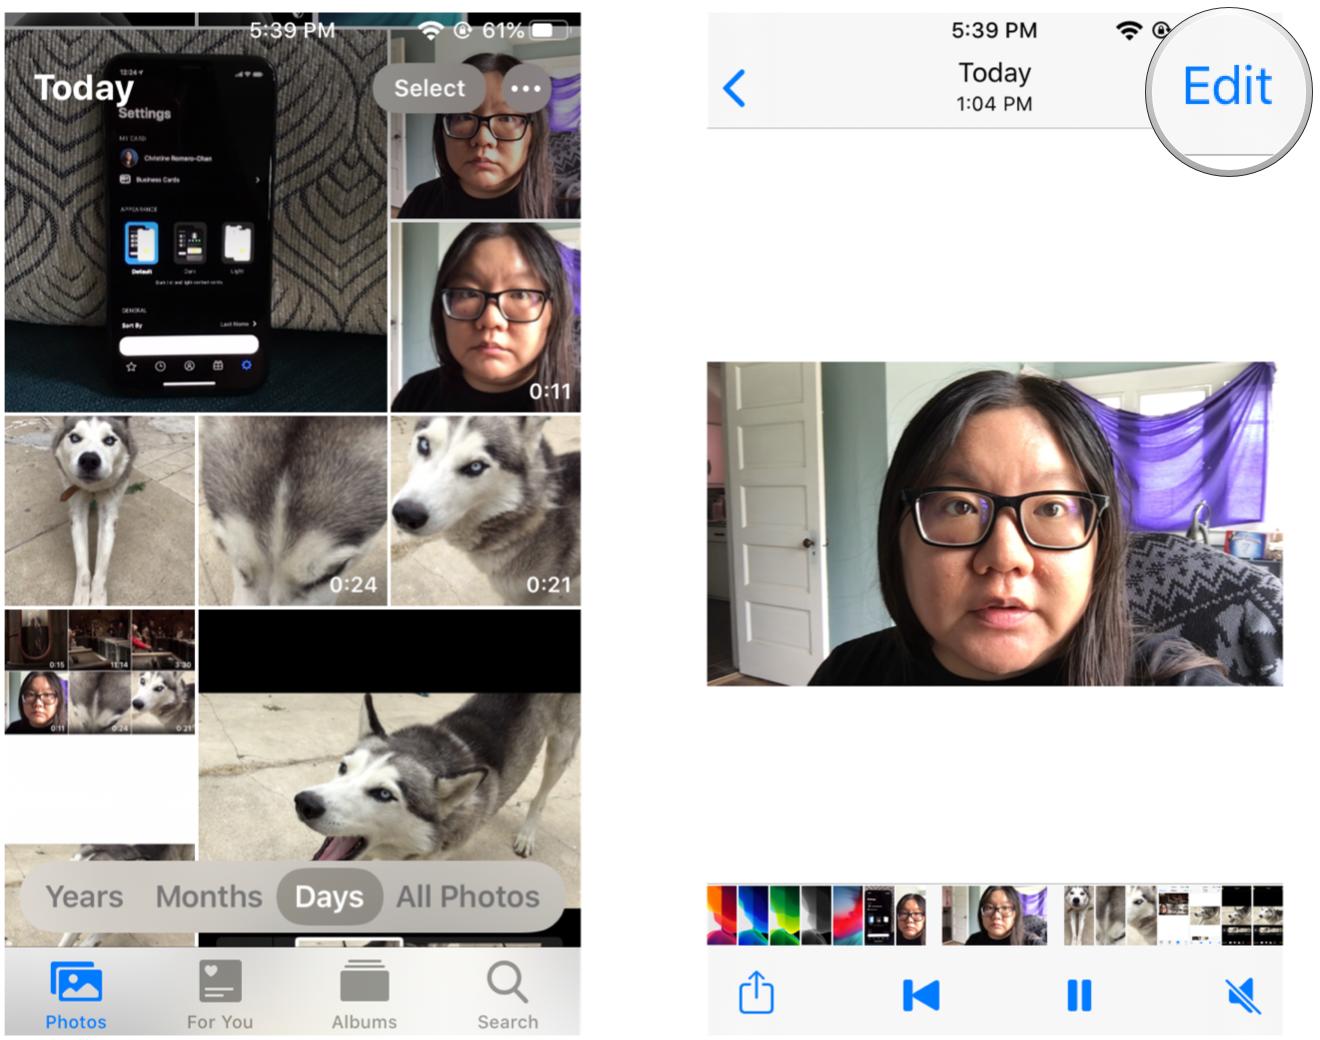 Launch Photos on iOS 13, select a video to edit